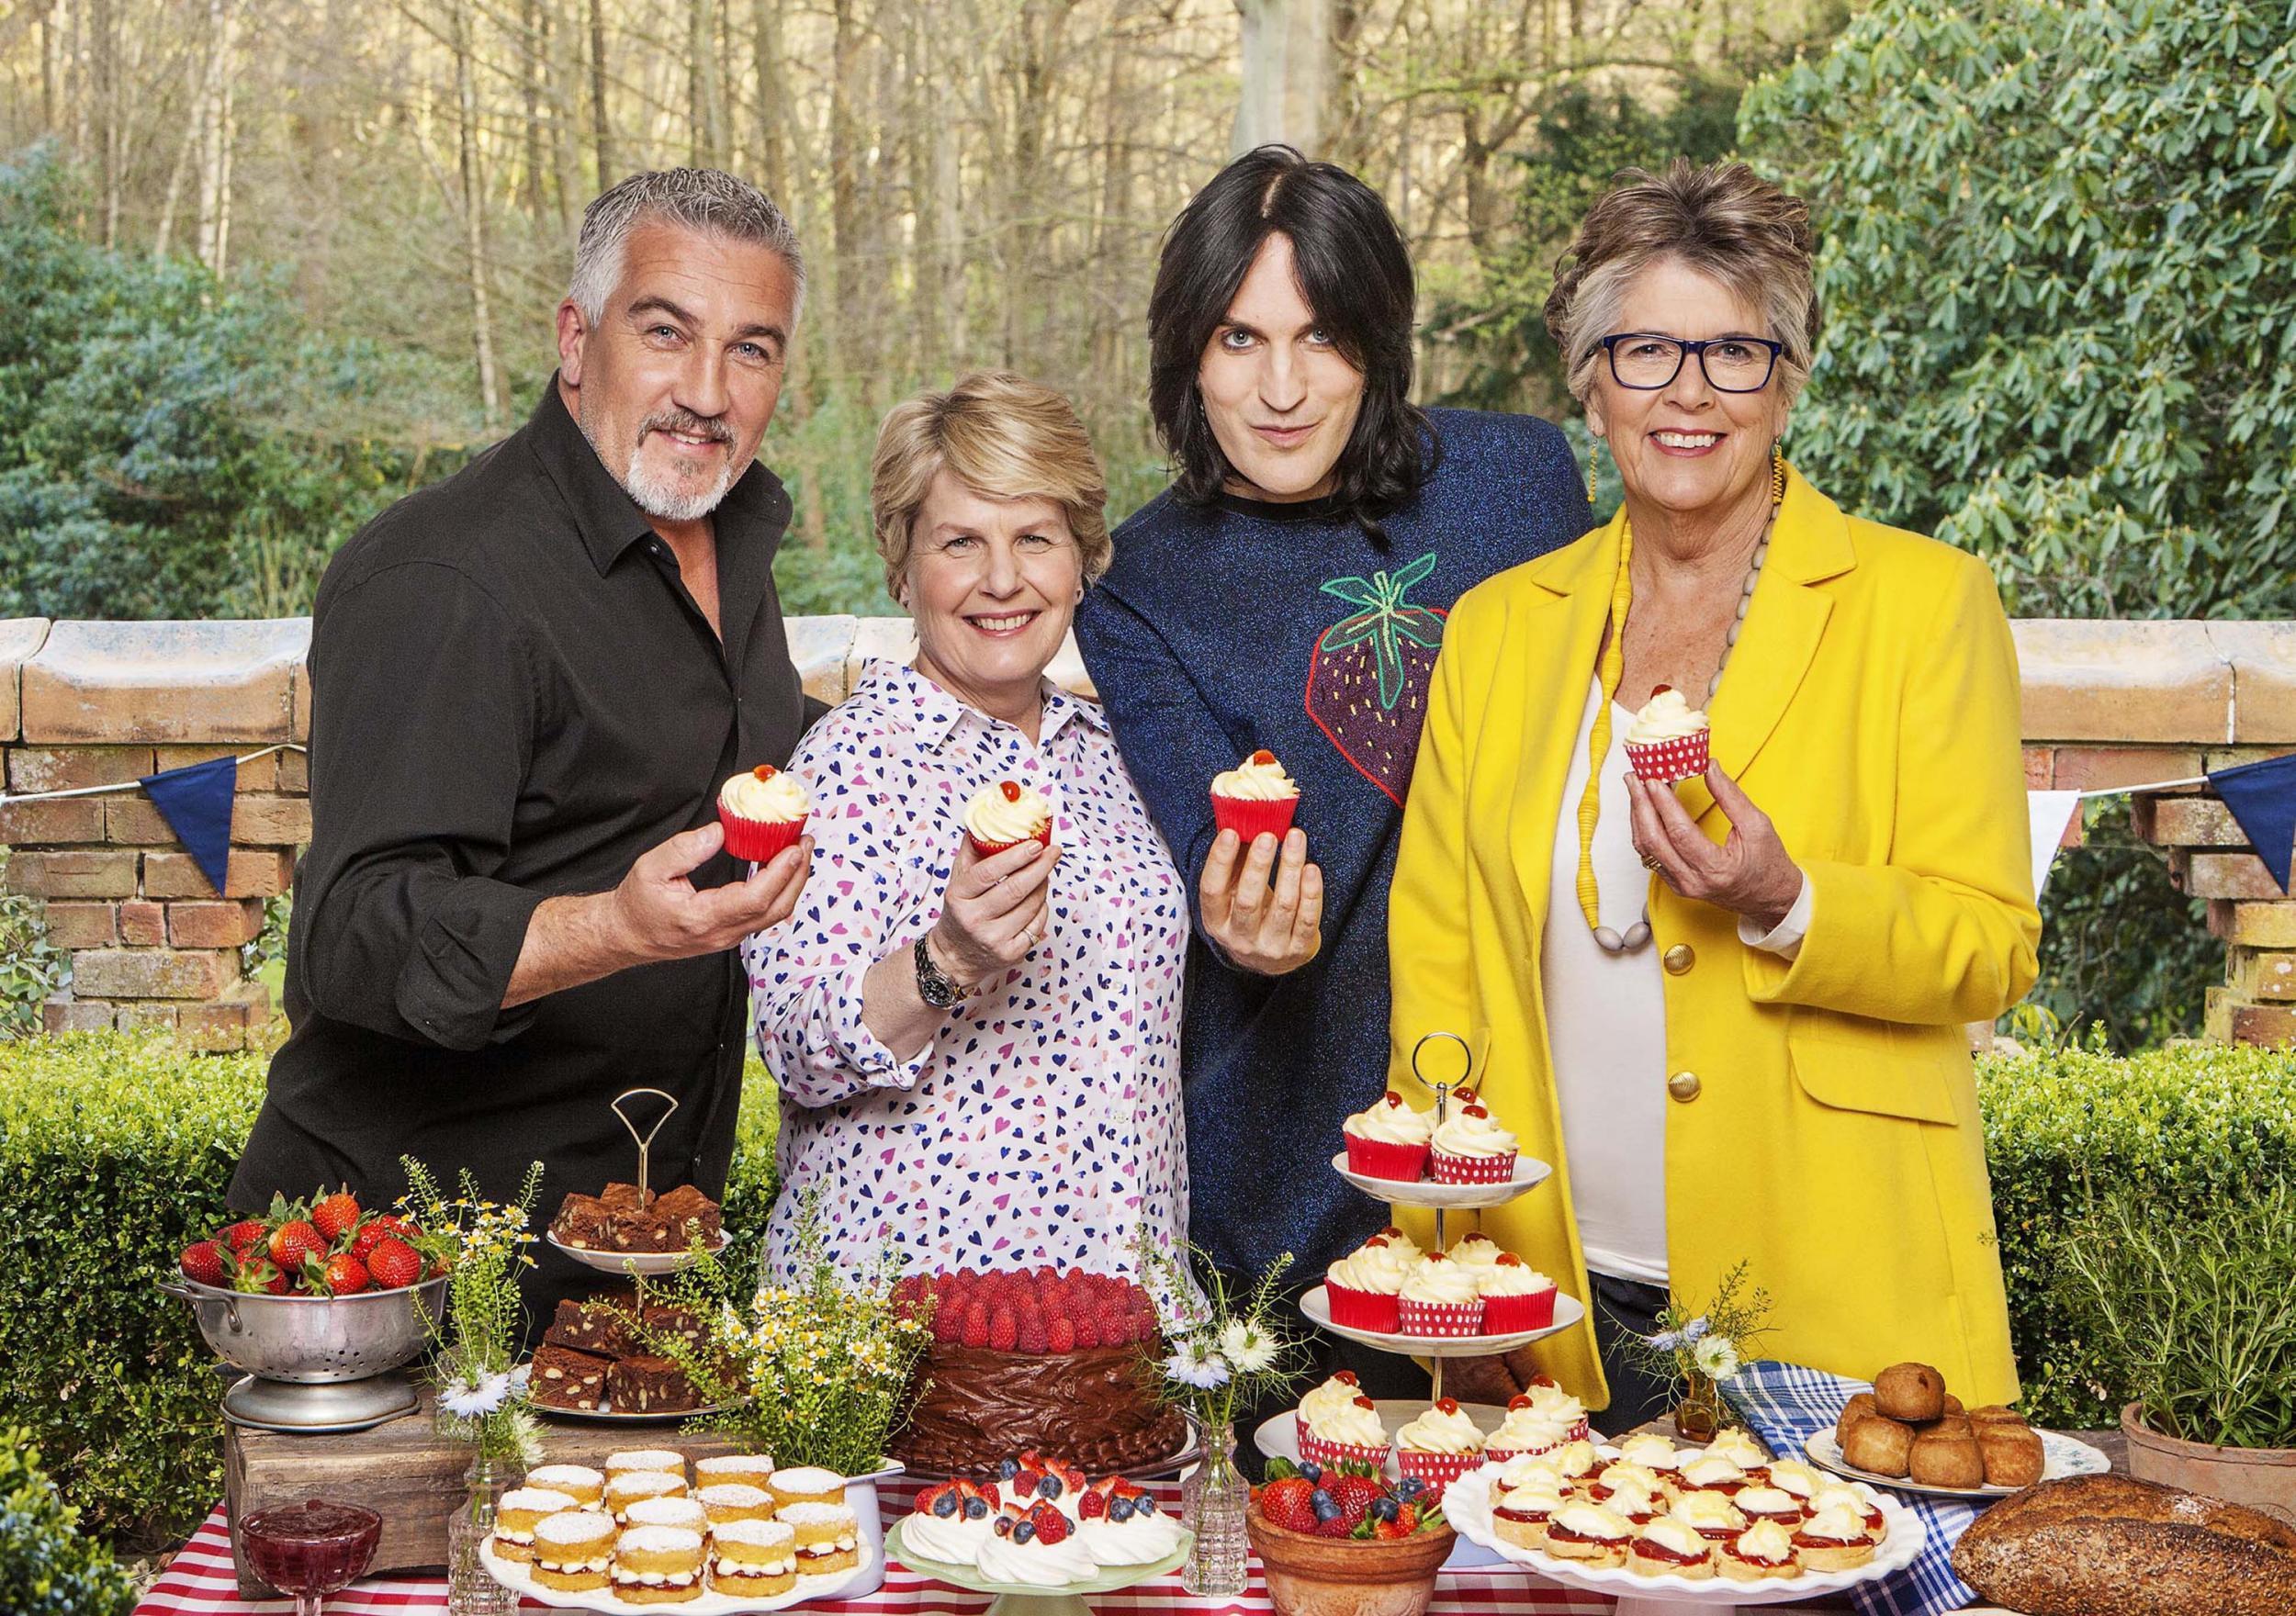 ‘Cooking Showdown’ is much duller than ’Bake Off’, because there’s just more intelligence and creativity in ‘Bake Off’